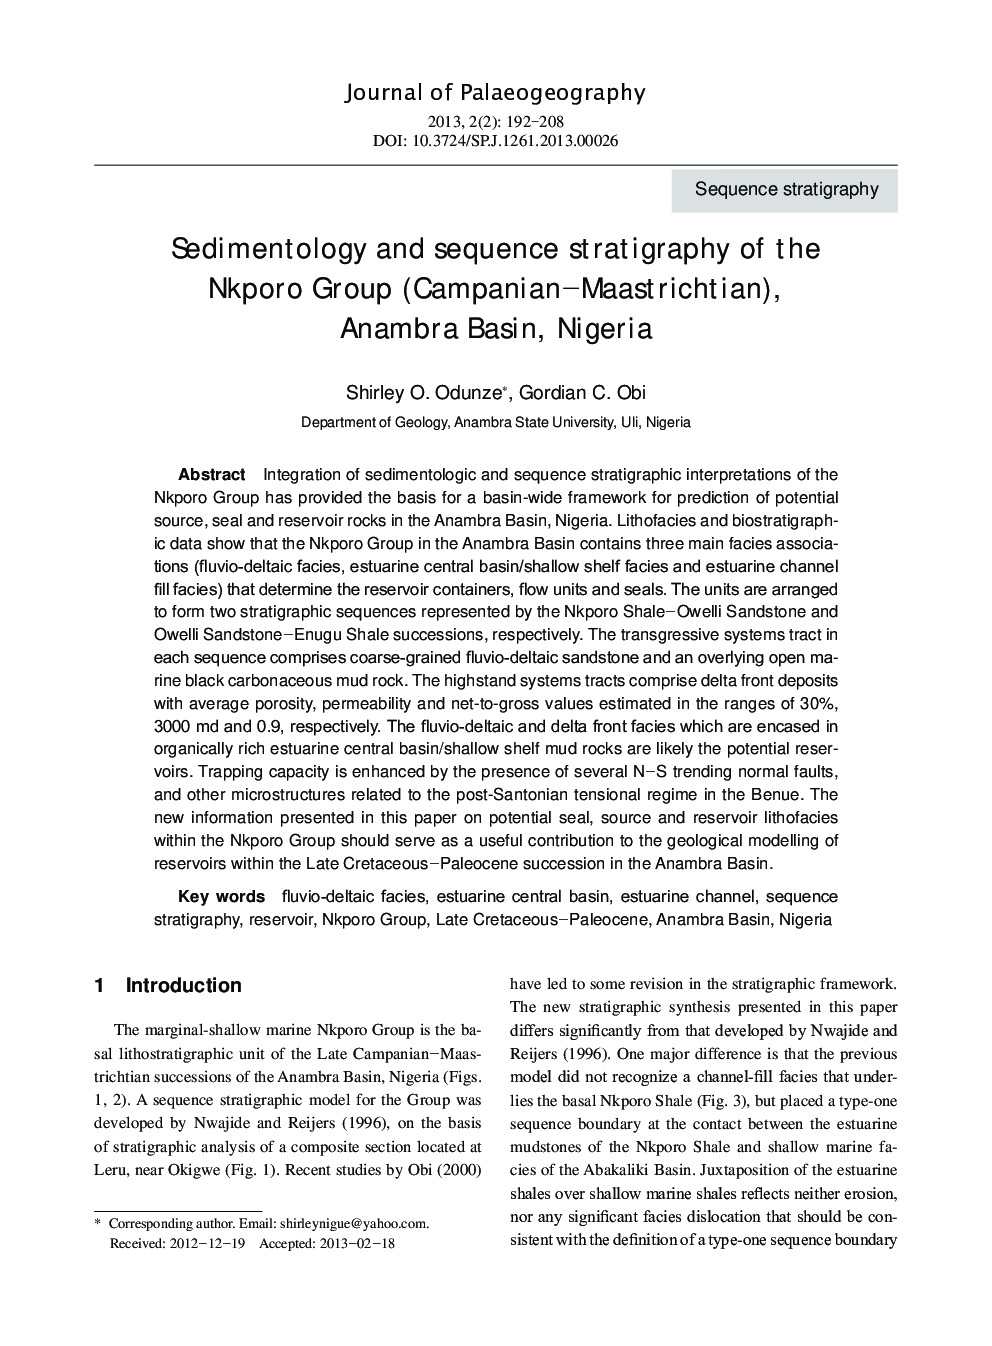 Sedimentology and sequence stratigraphy of the Nkporo Group (Campanian–Maastrichtian), Anambra Basin, Nigeria